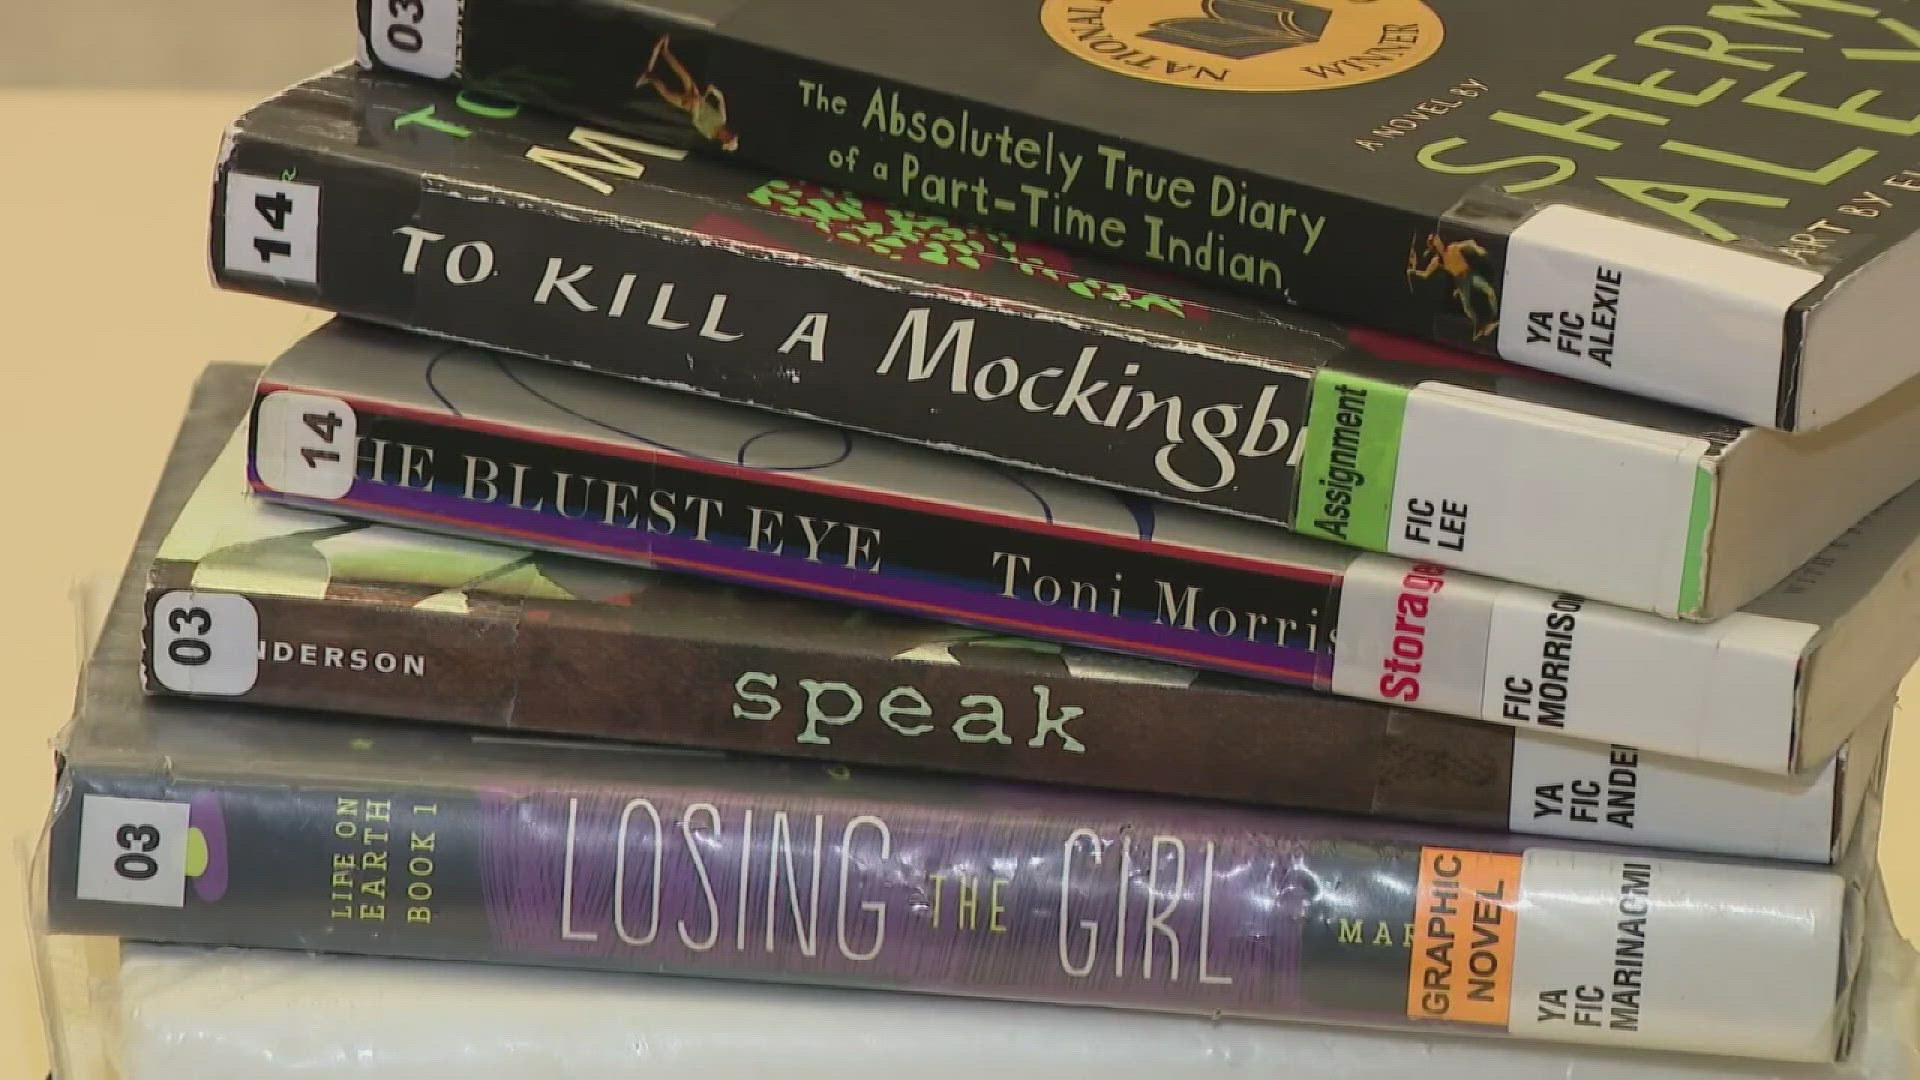 Knox County schools will need to examine the books on their shelves to comply with the law.